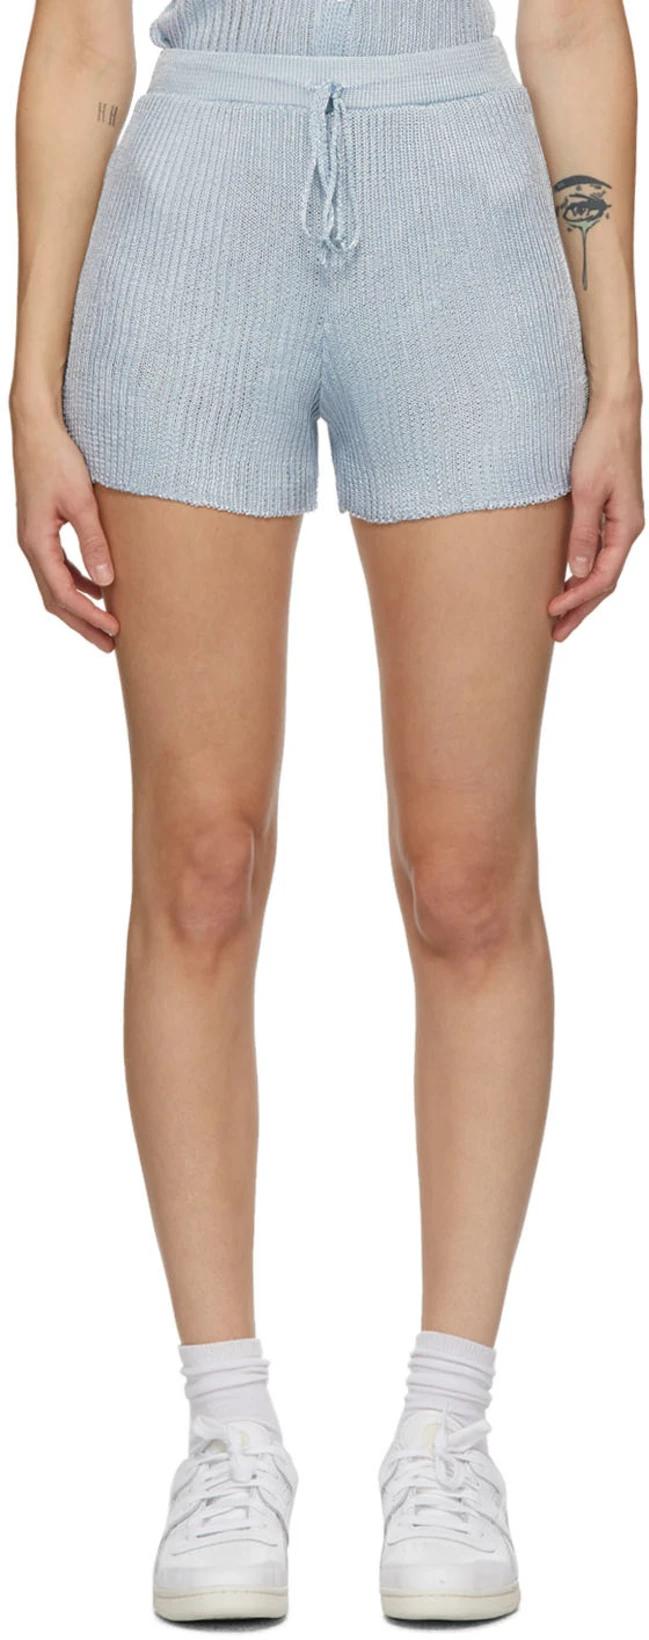 Blue Ribbed Shorts by CALLE DEL MAR